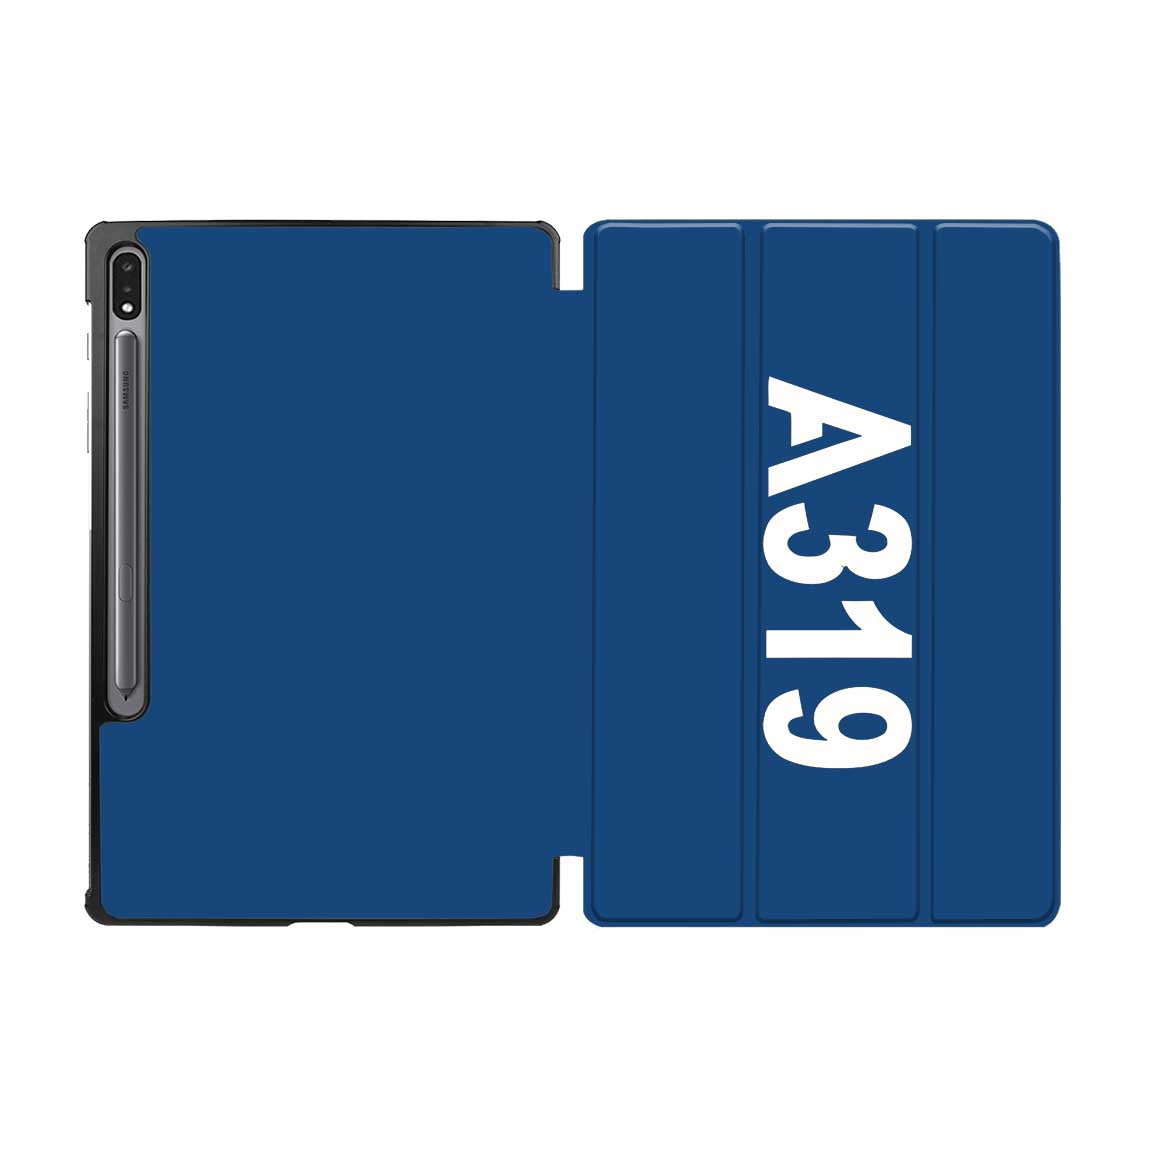 A319 Text Designed Samsung Tablet Cases